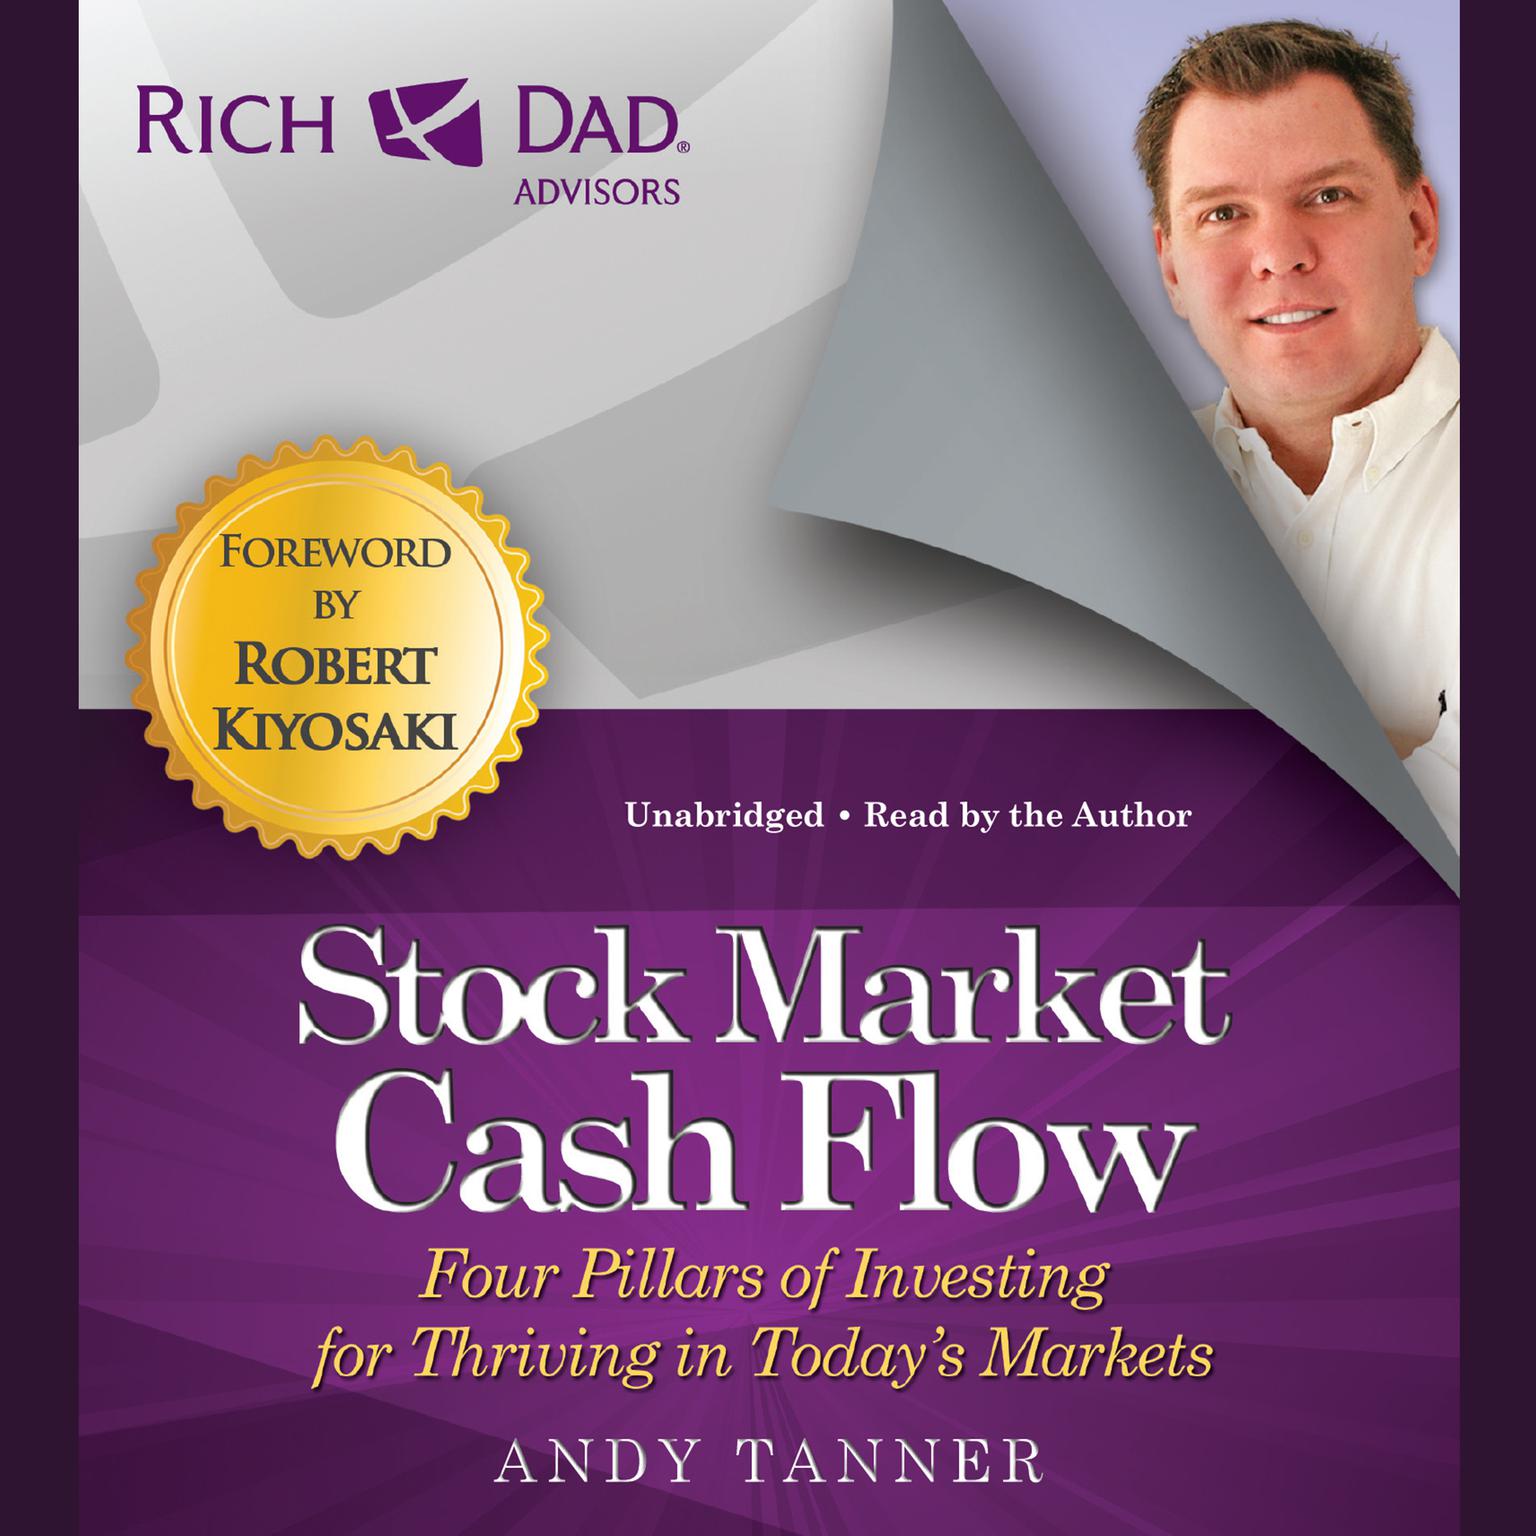 Rich Dad Advisors: Stock Market Cash Flow: Four Pillars of Investing for Thriving in Todays Markets Audiobook, by Andy Tanner